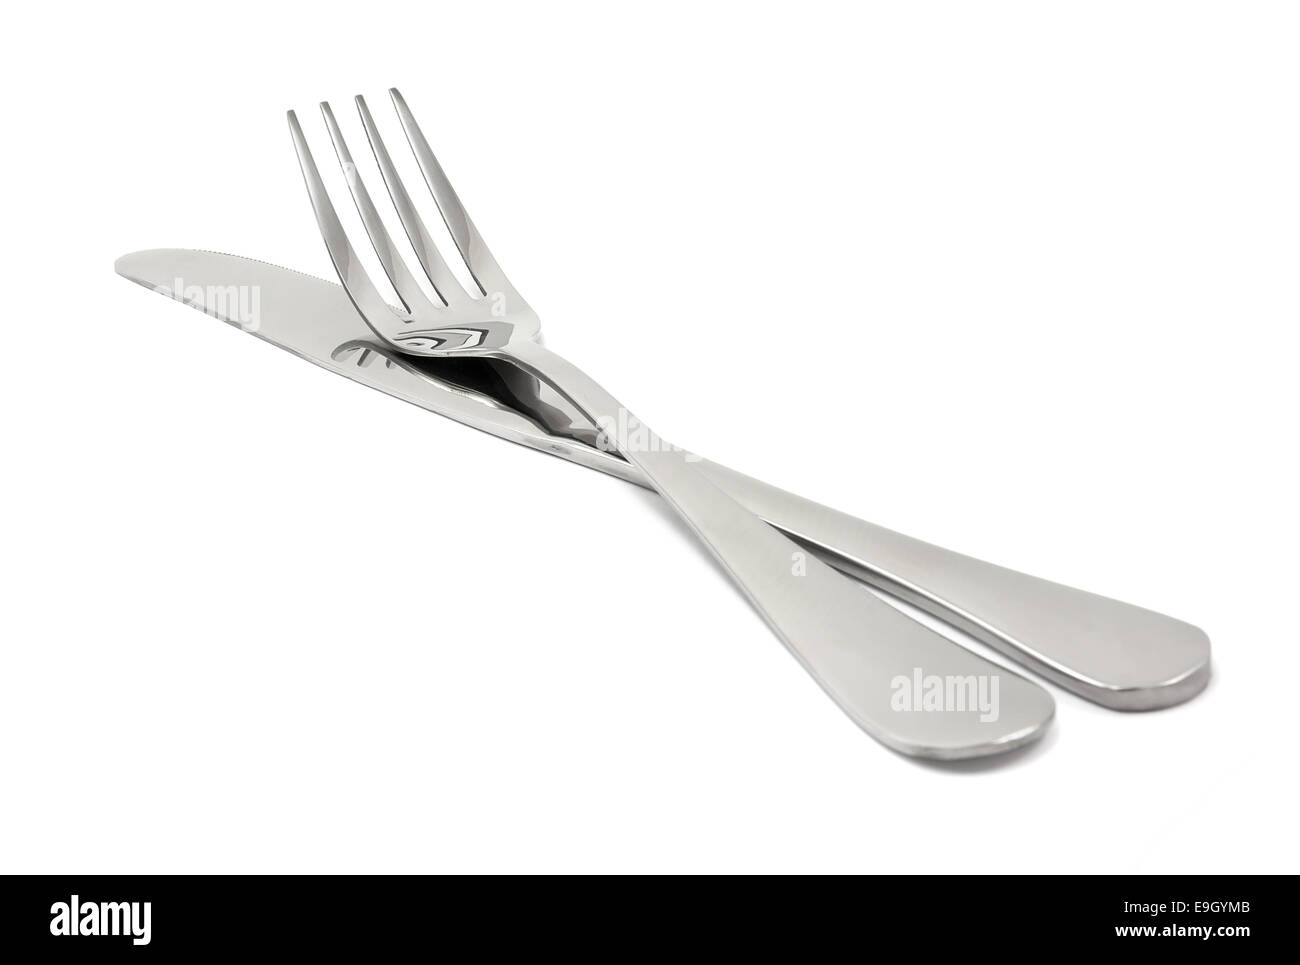 Knife and fork on a white background Stock Photo